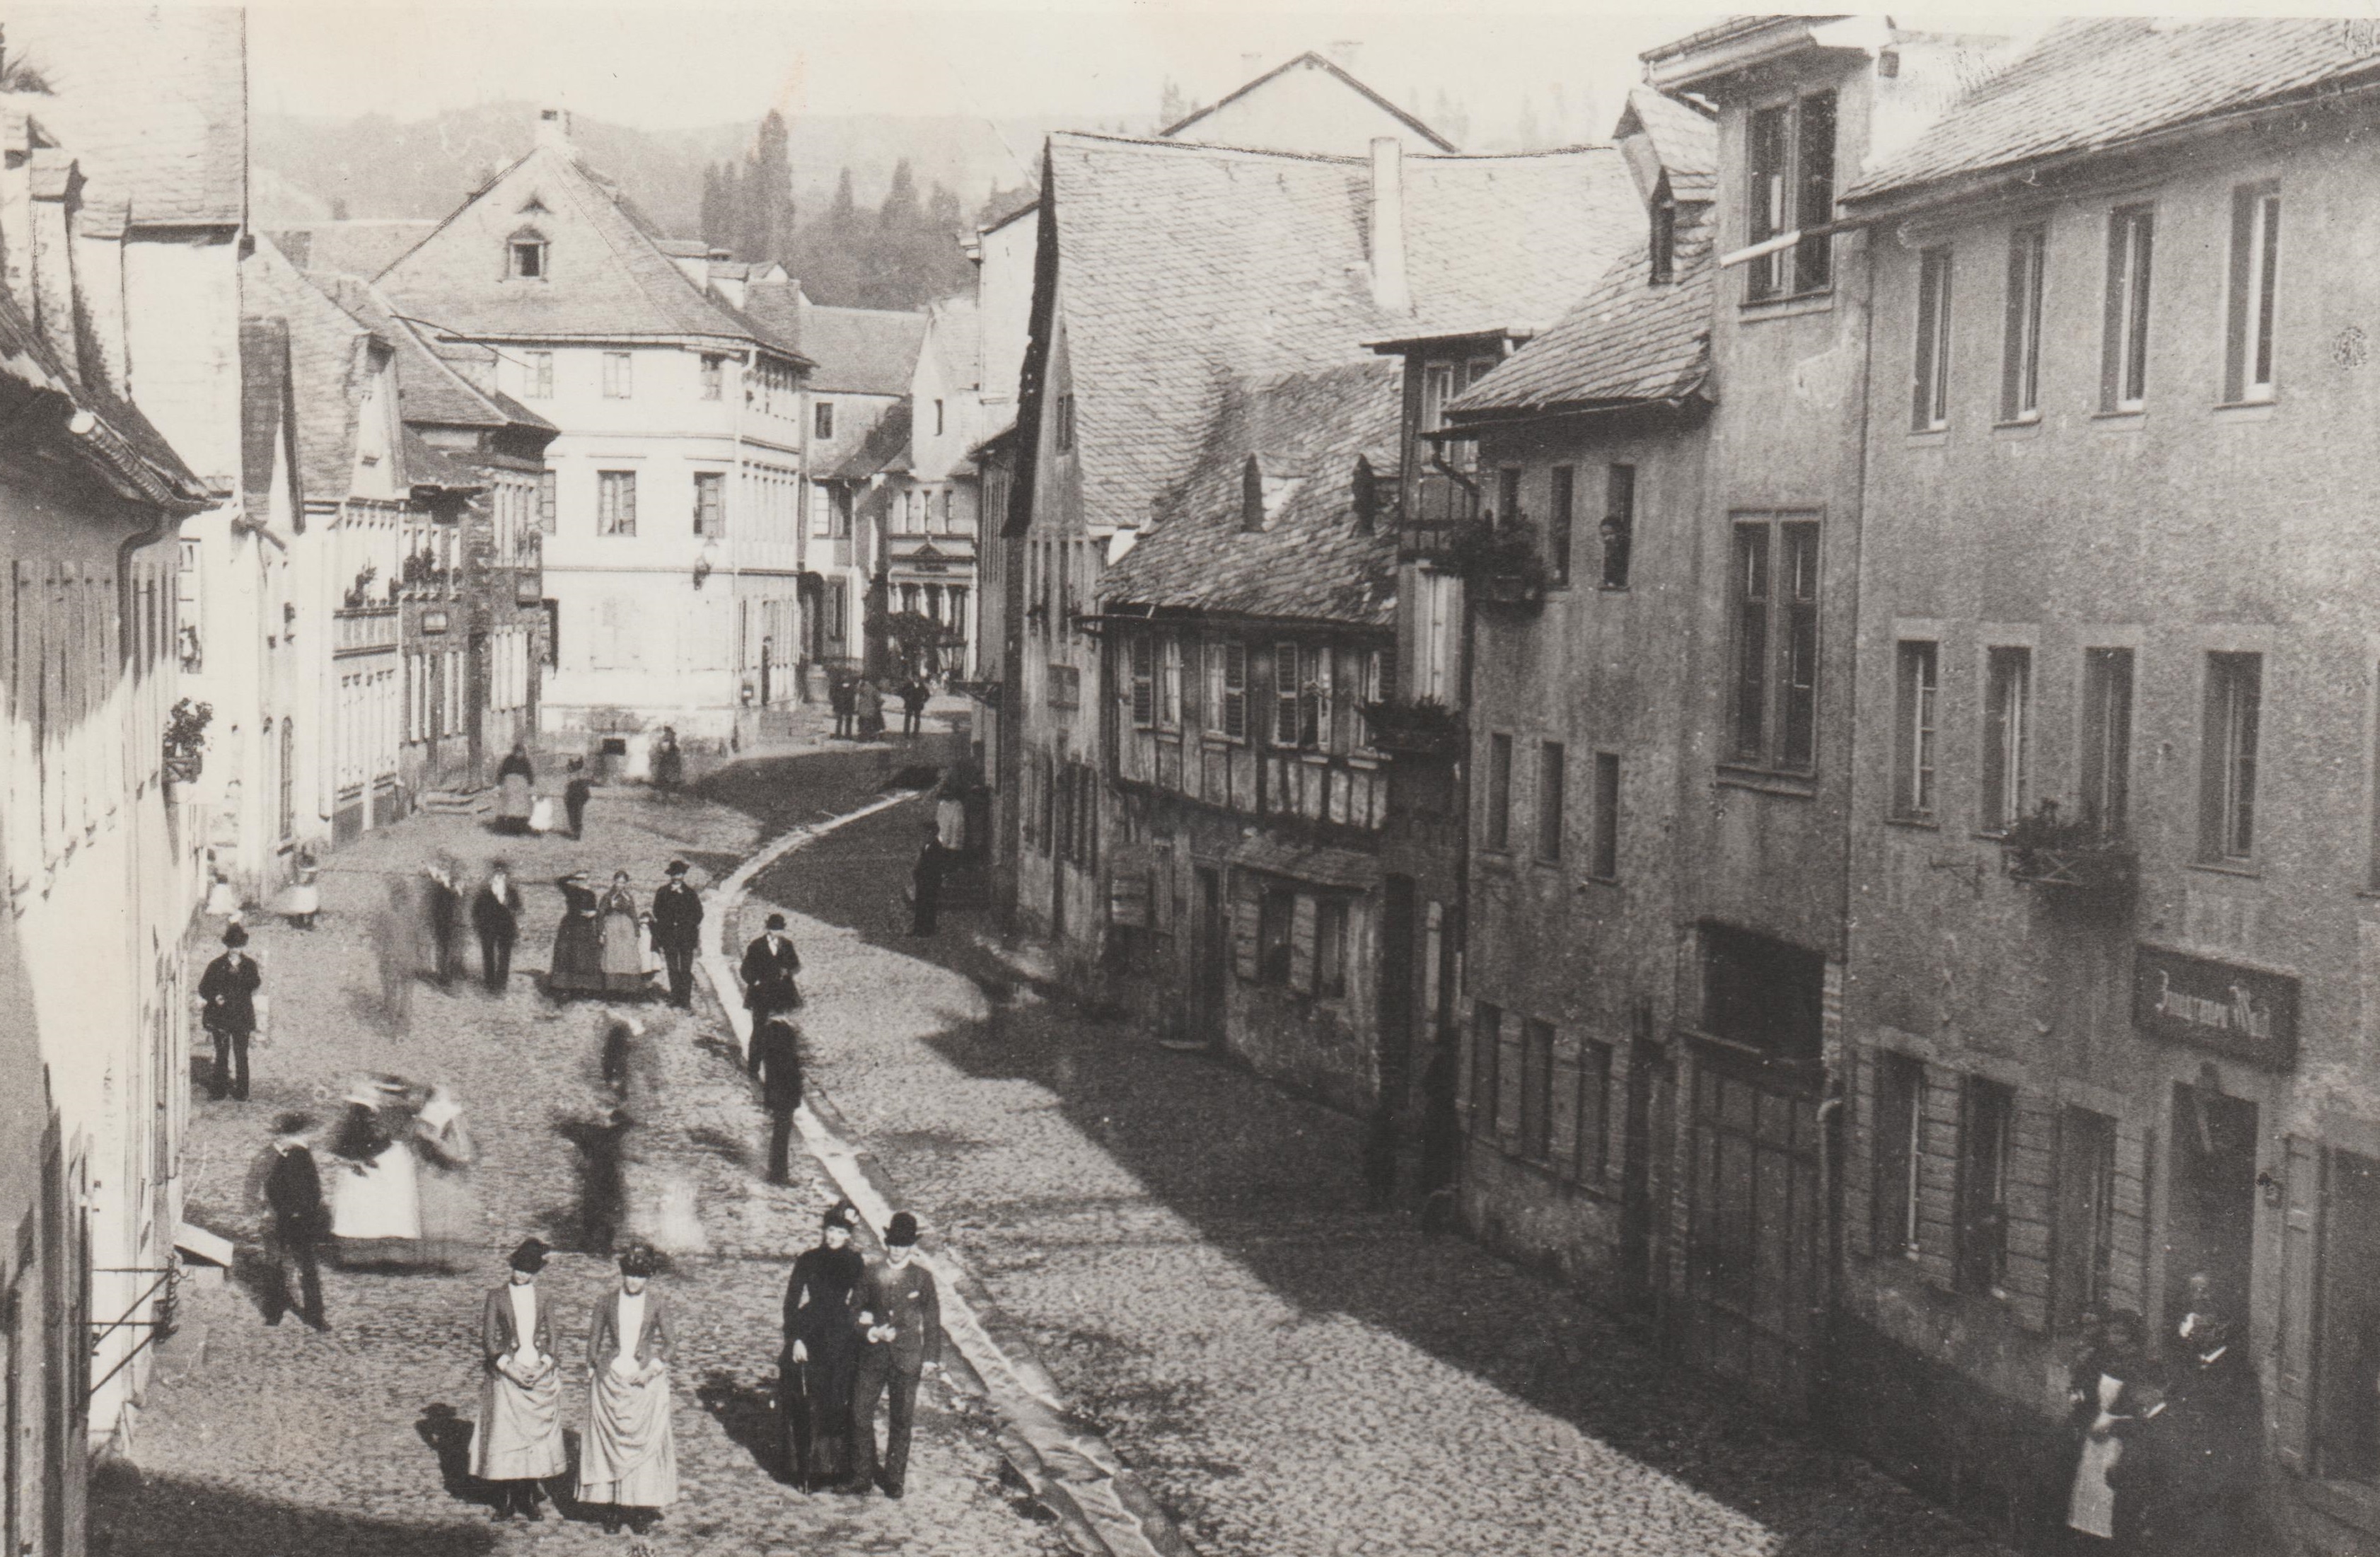 Untere Bachstrasse in Bendorf um 1880 (REM CC BY-NC-SA)